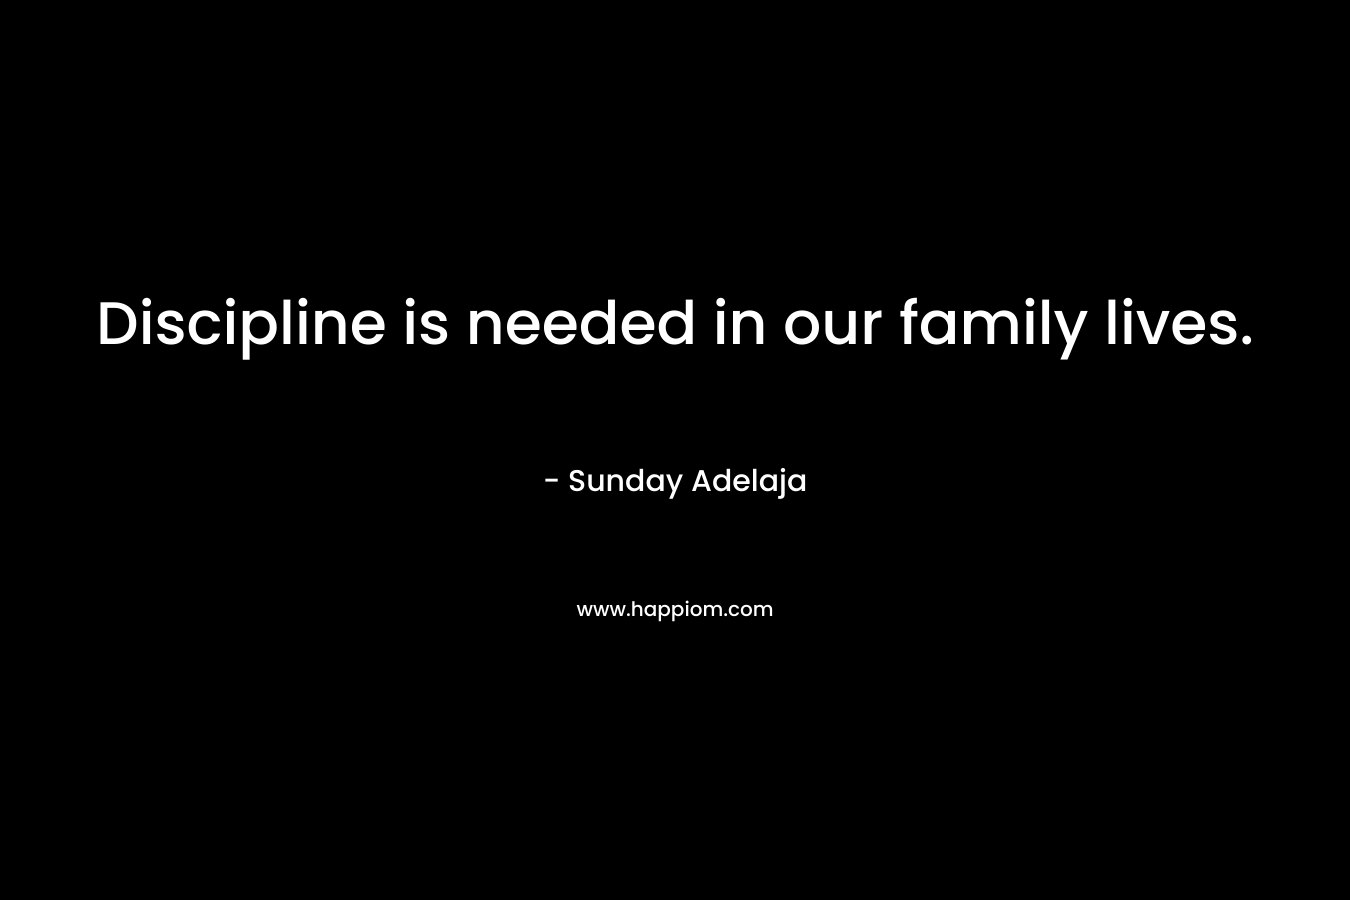 Discipline is needed in our family lives.